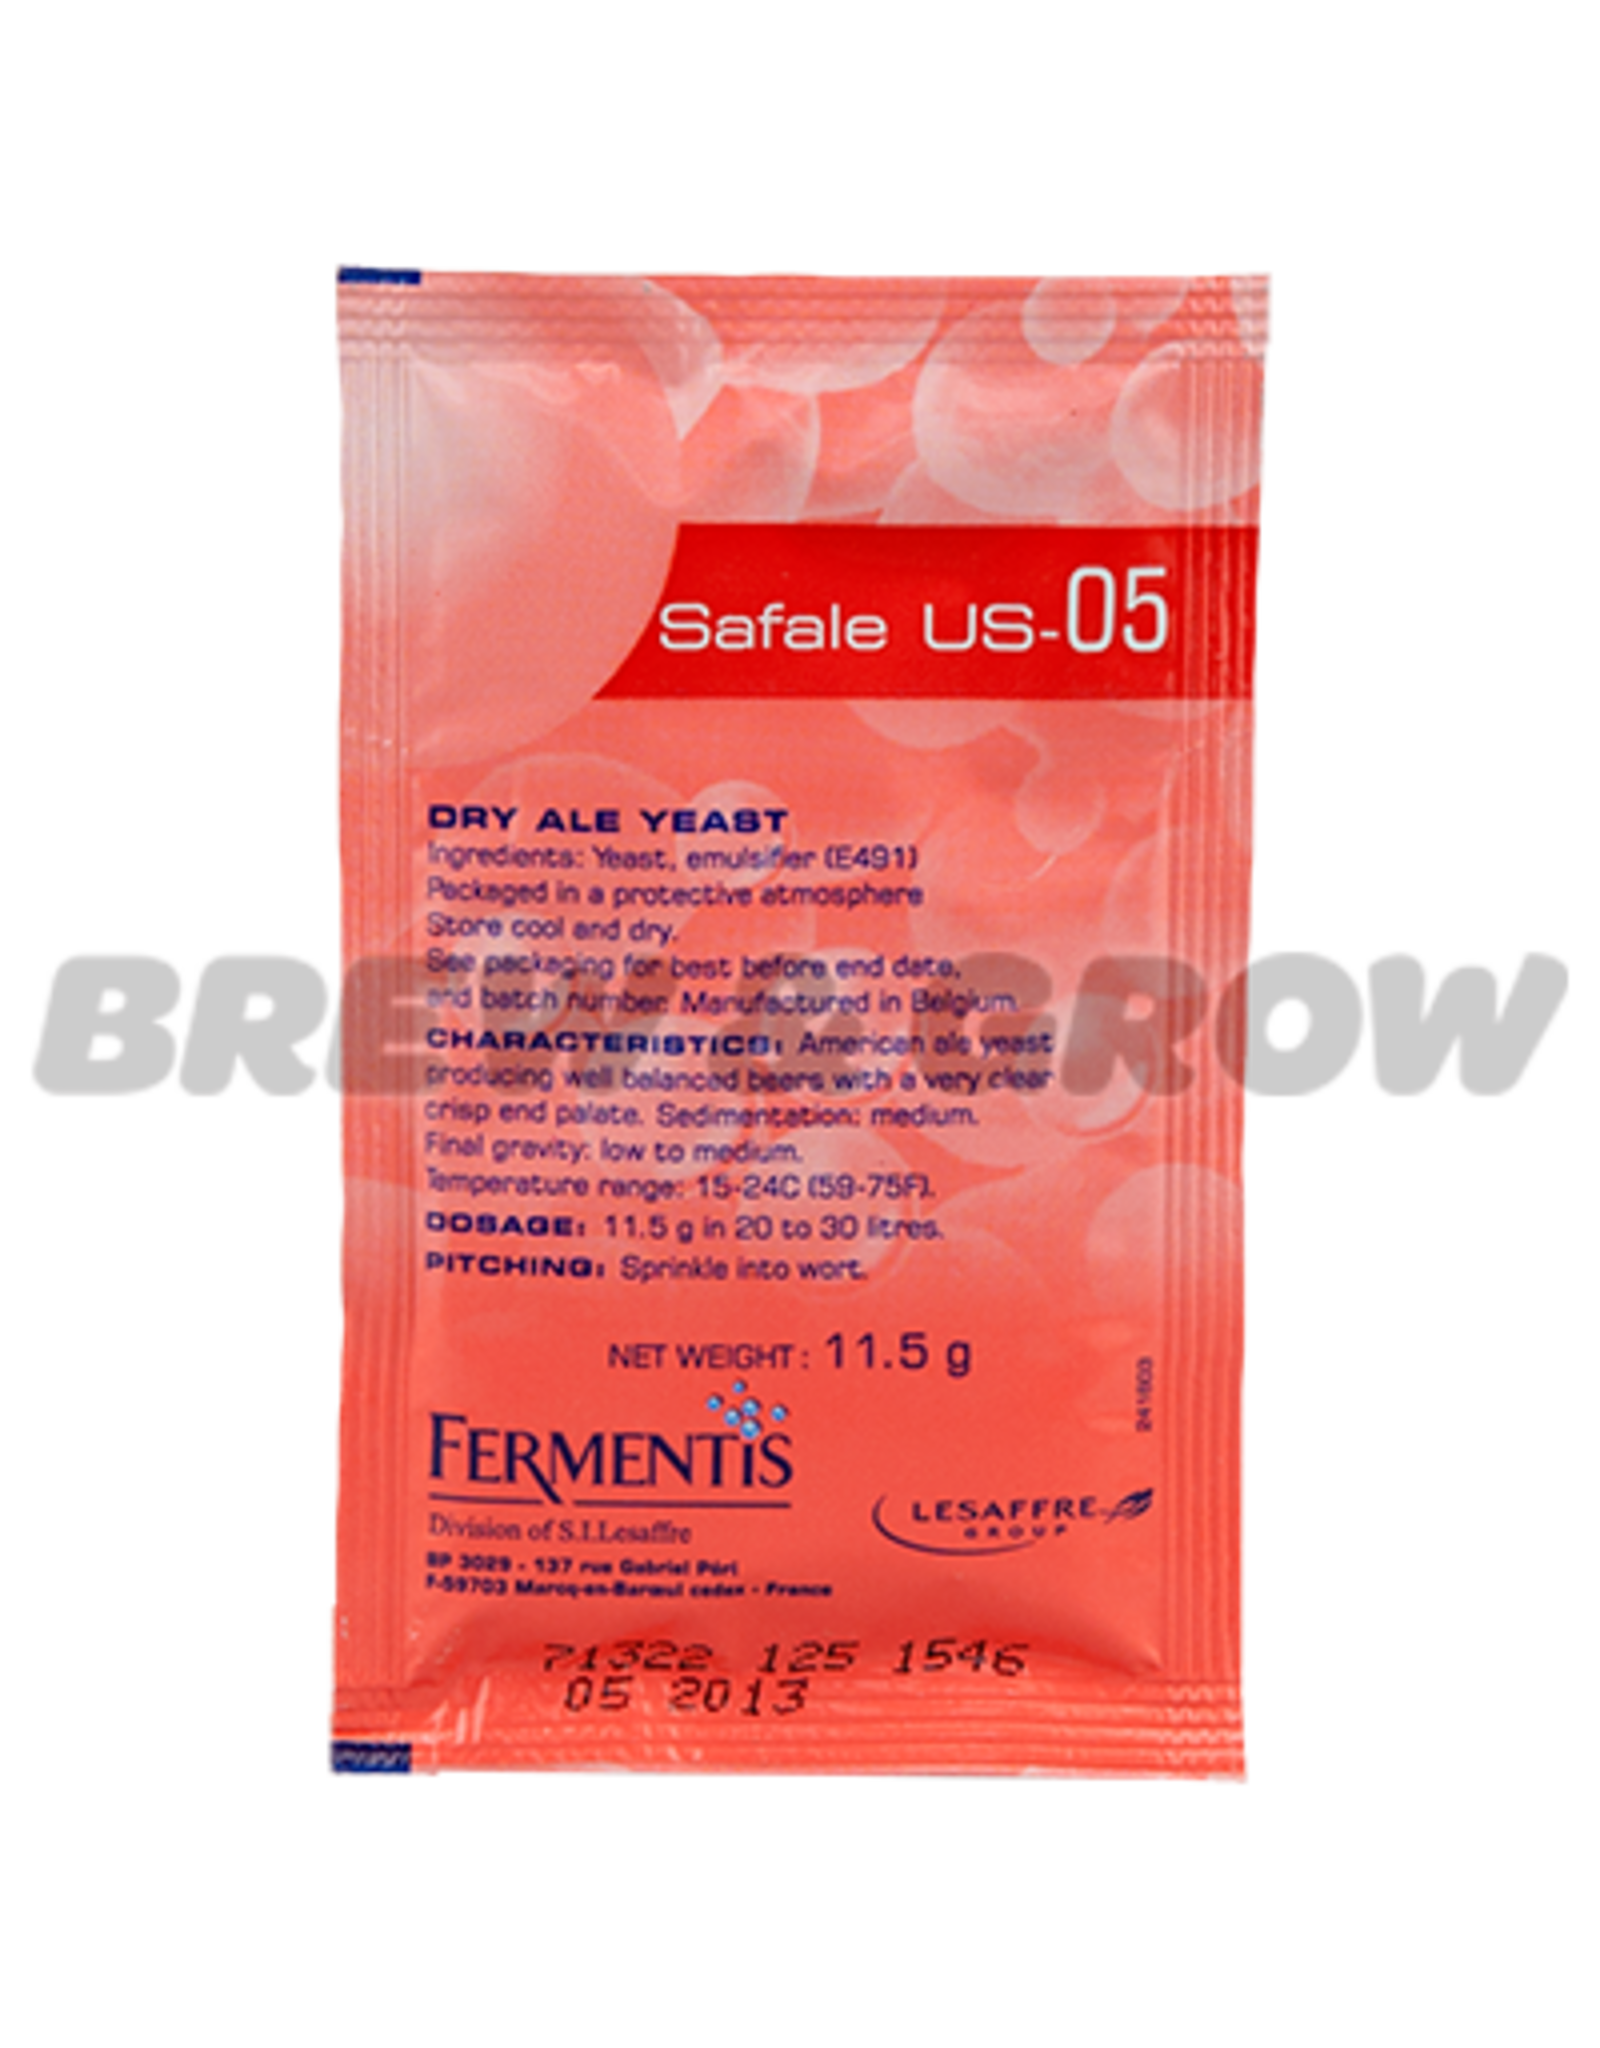 Safale US-05 Dry Ale Yeast